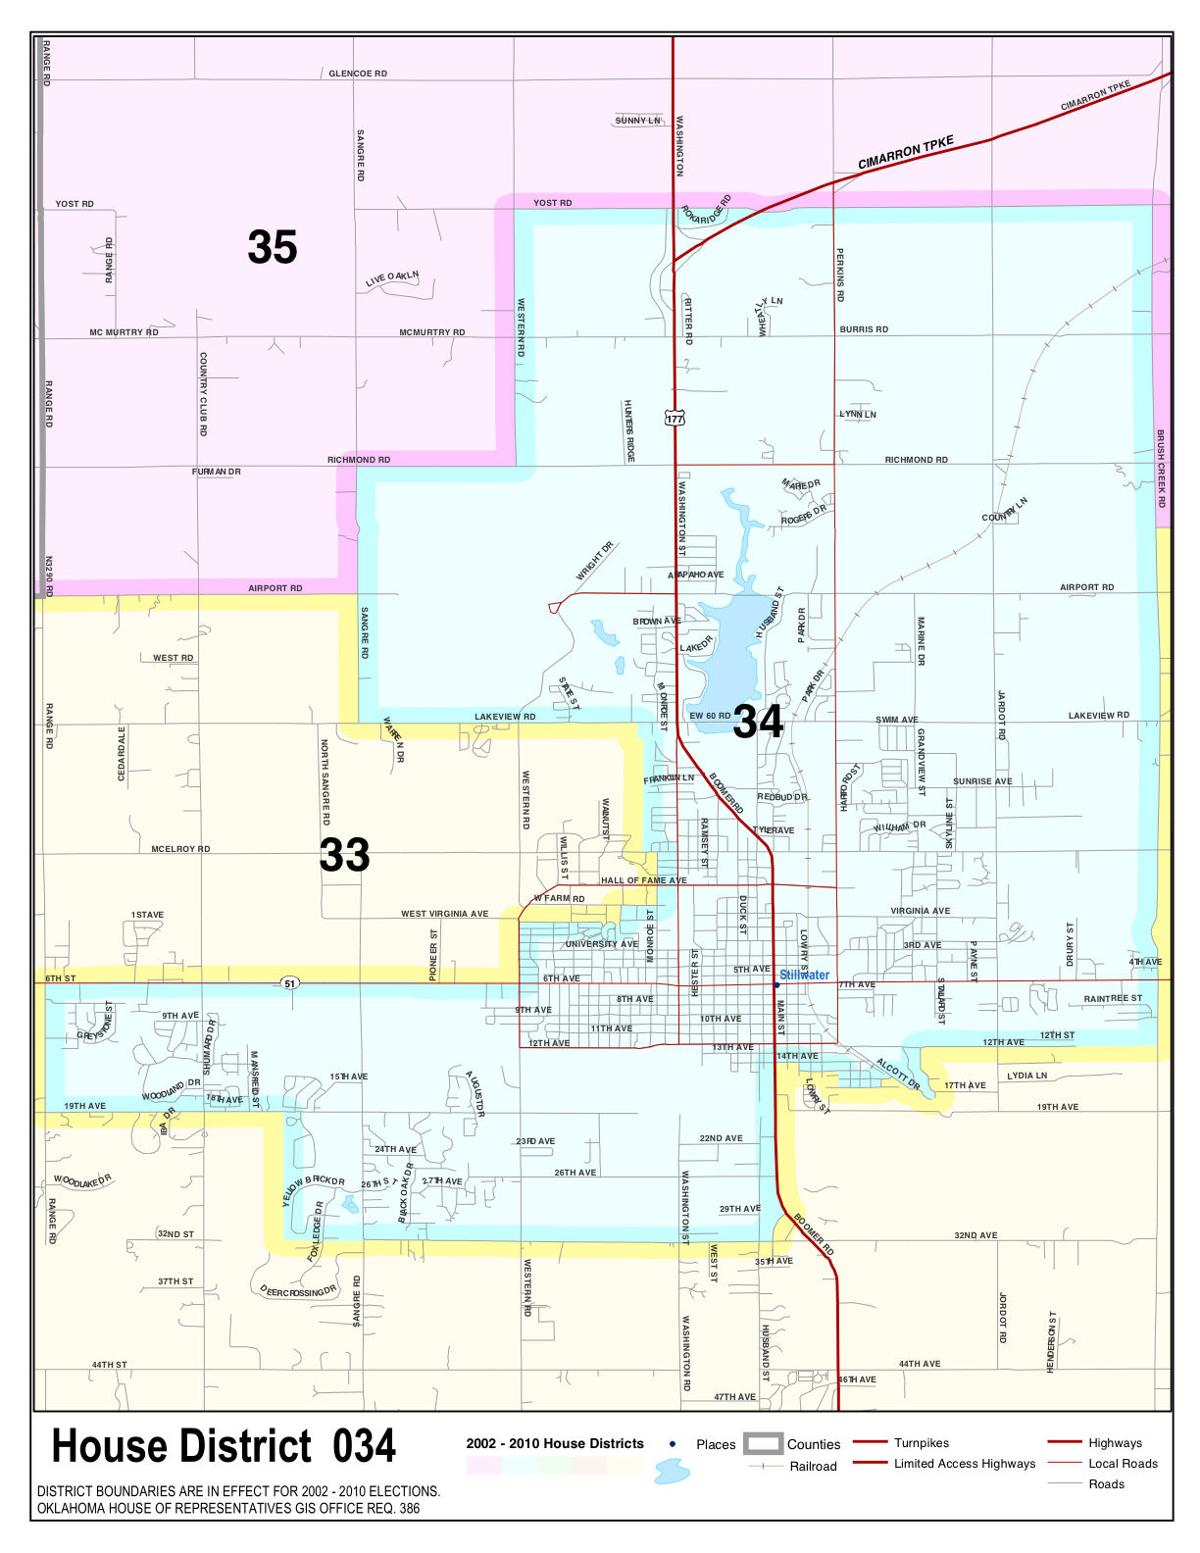 Stillwater-area districts revised to accommodate increased state